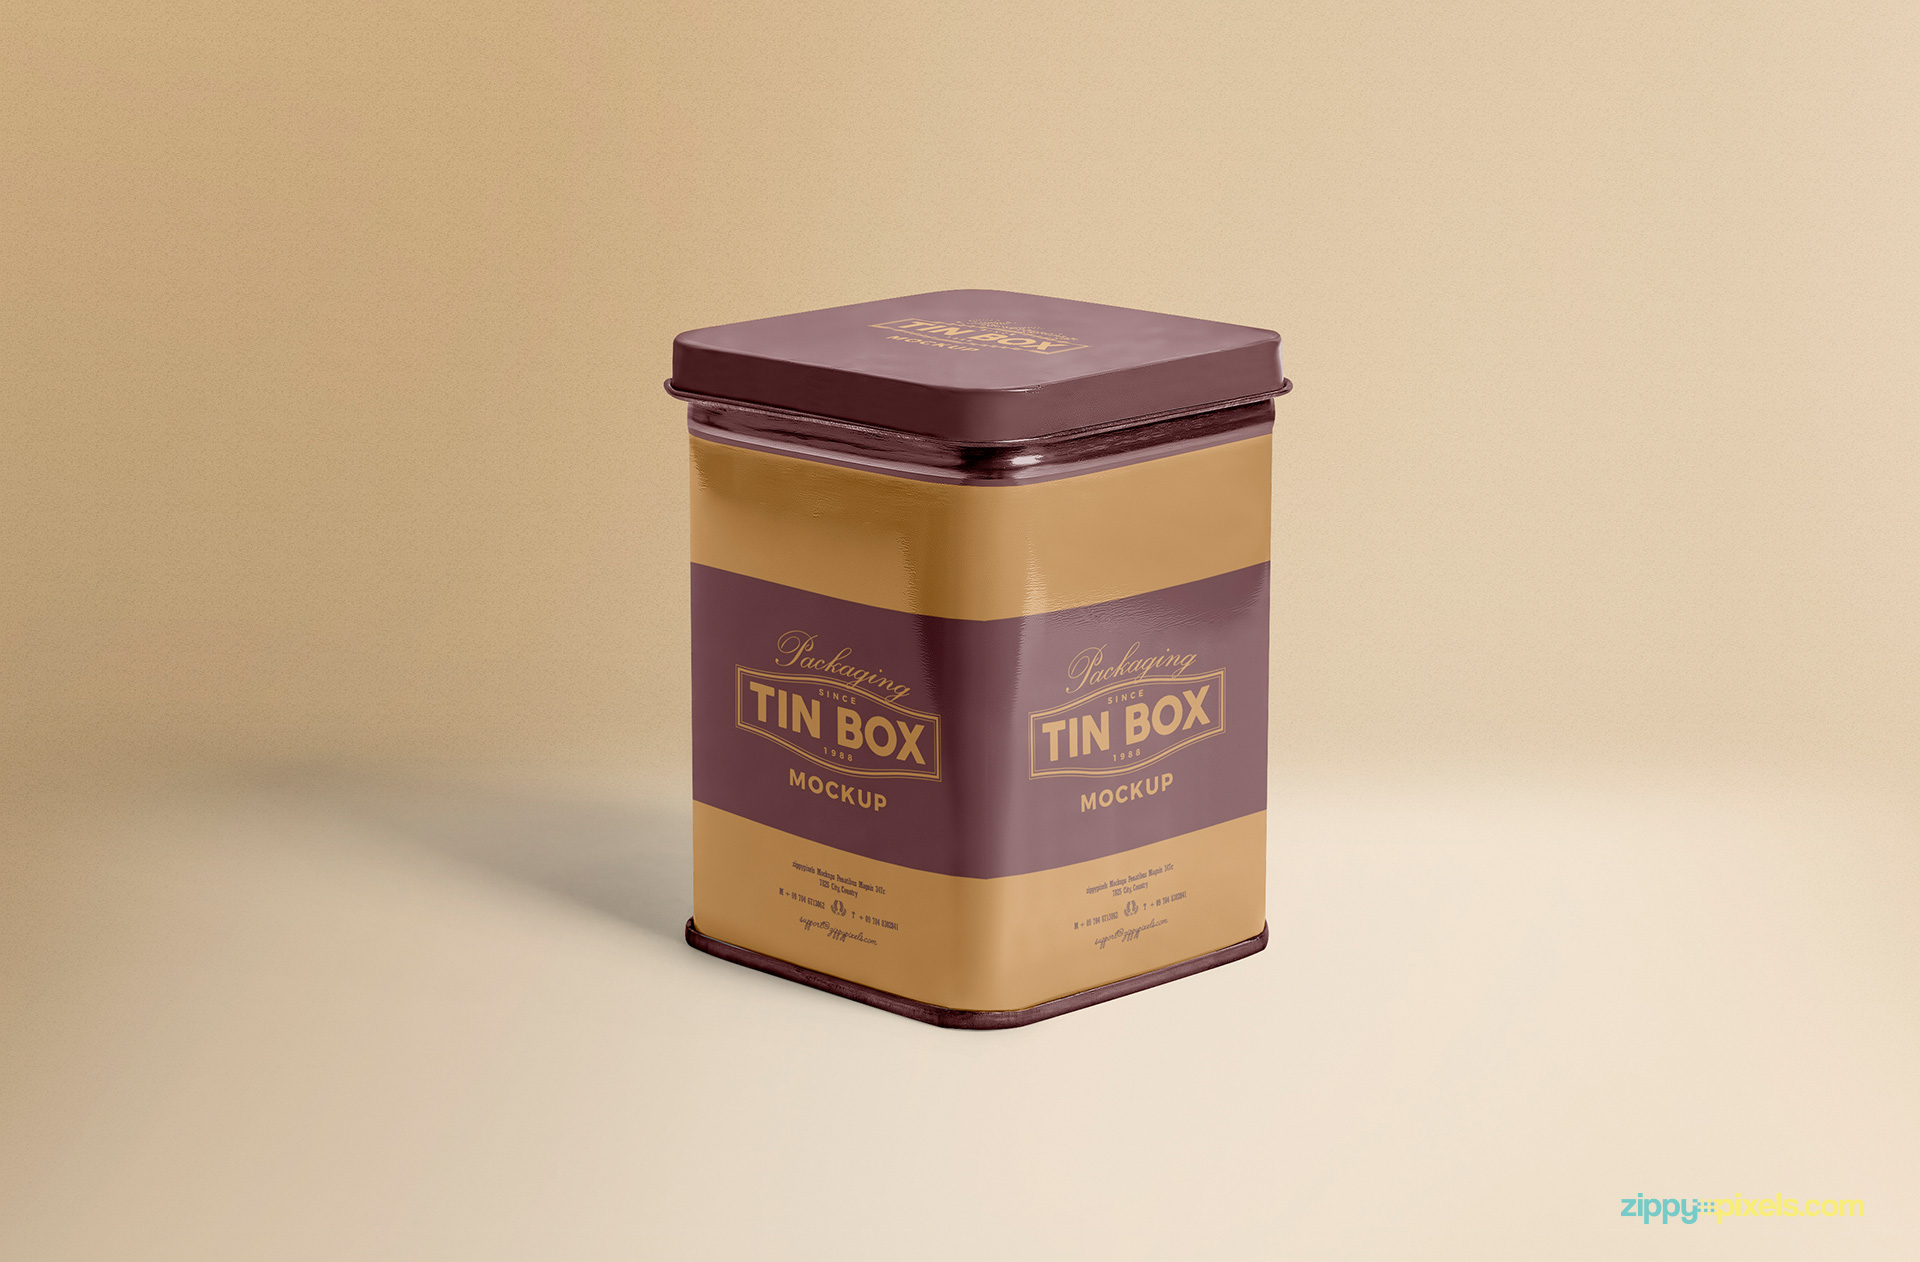 Excellent and full view of the Box Packaging Mockup PSD Free.